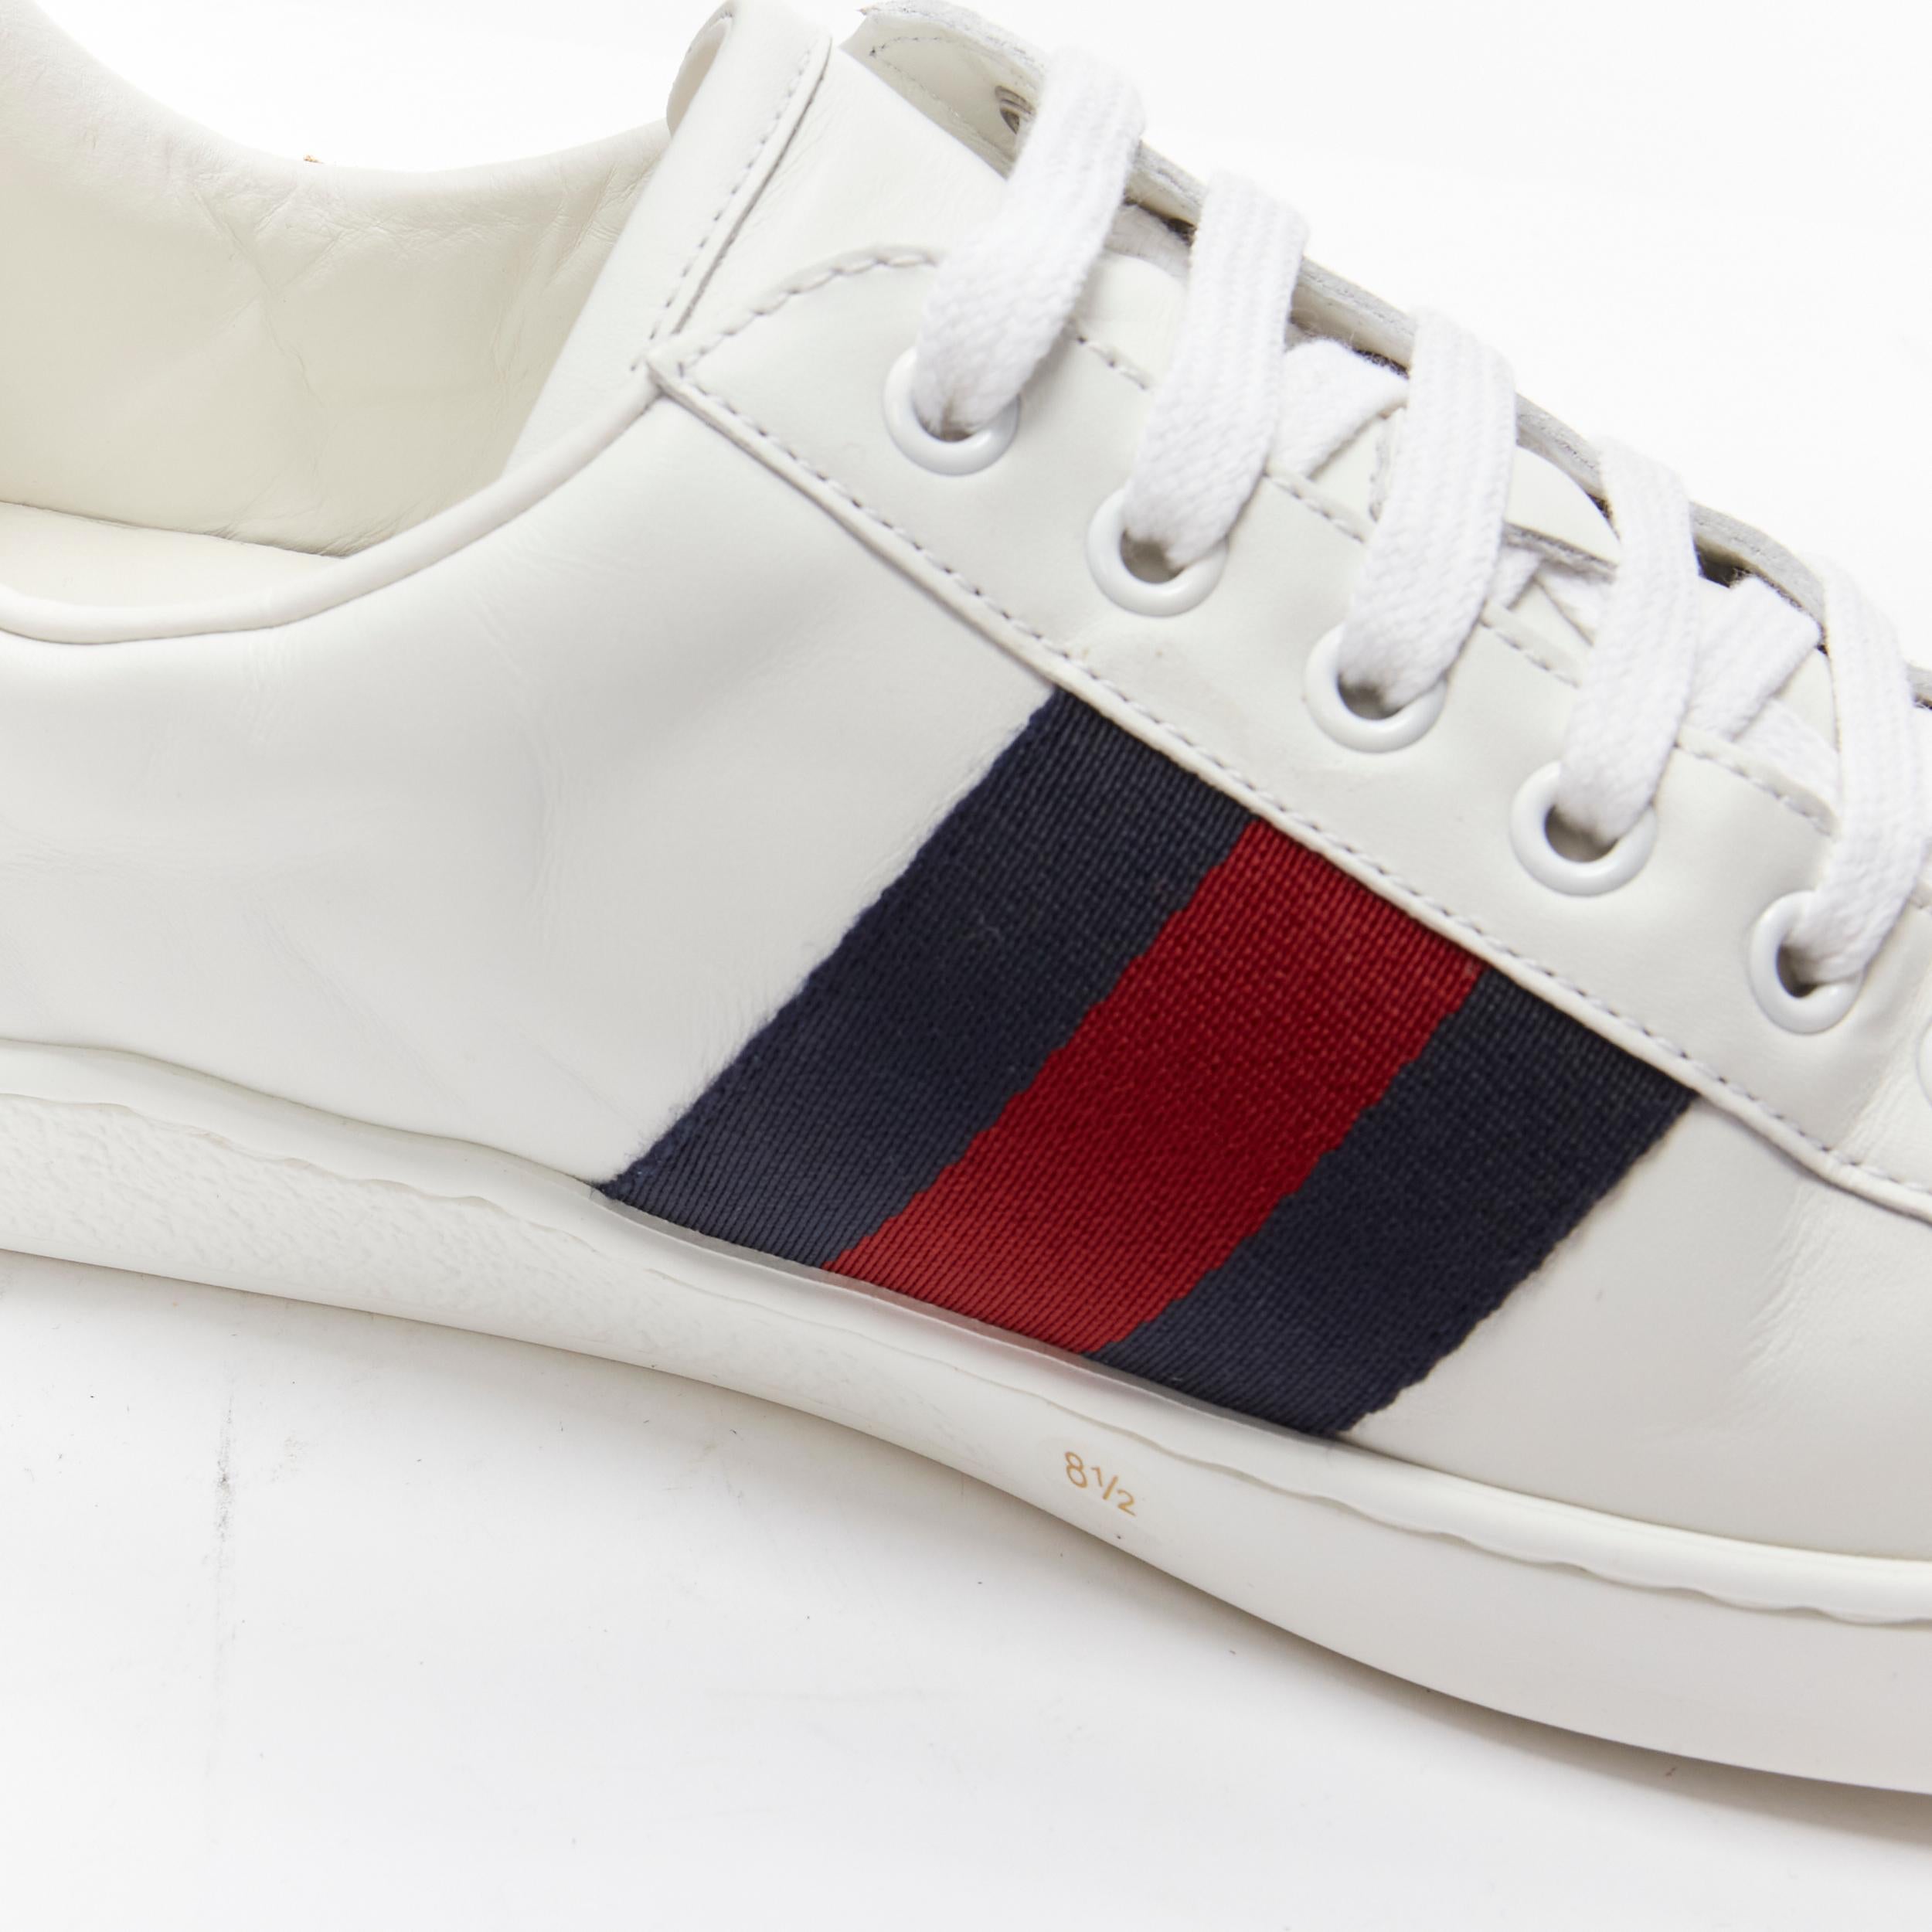 GUCCI Ace Loved gold embroidered blue red web leather sneakers UK8.5 EU42.5 For Sale 2